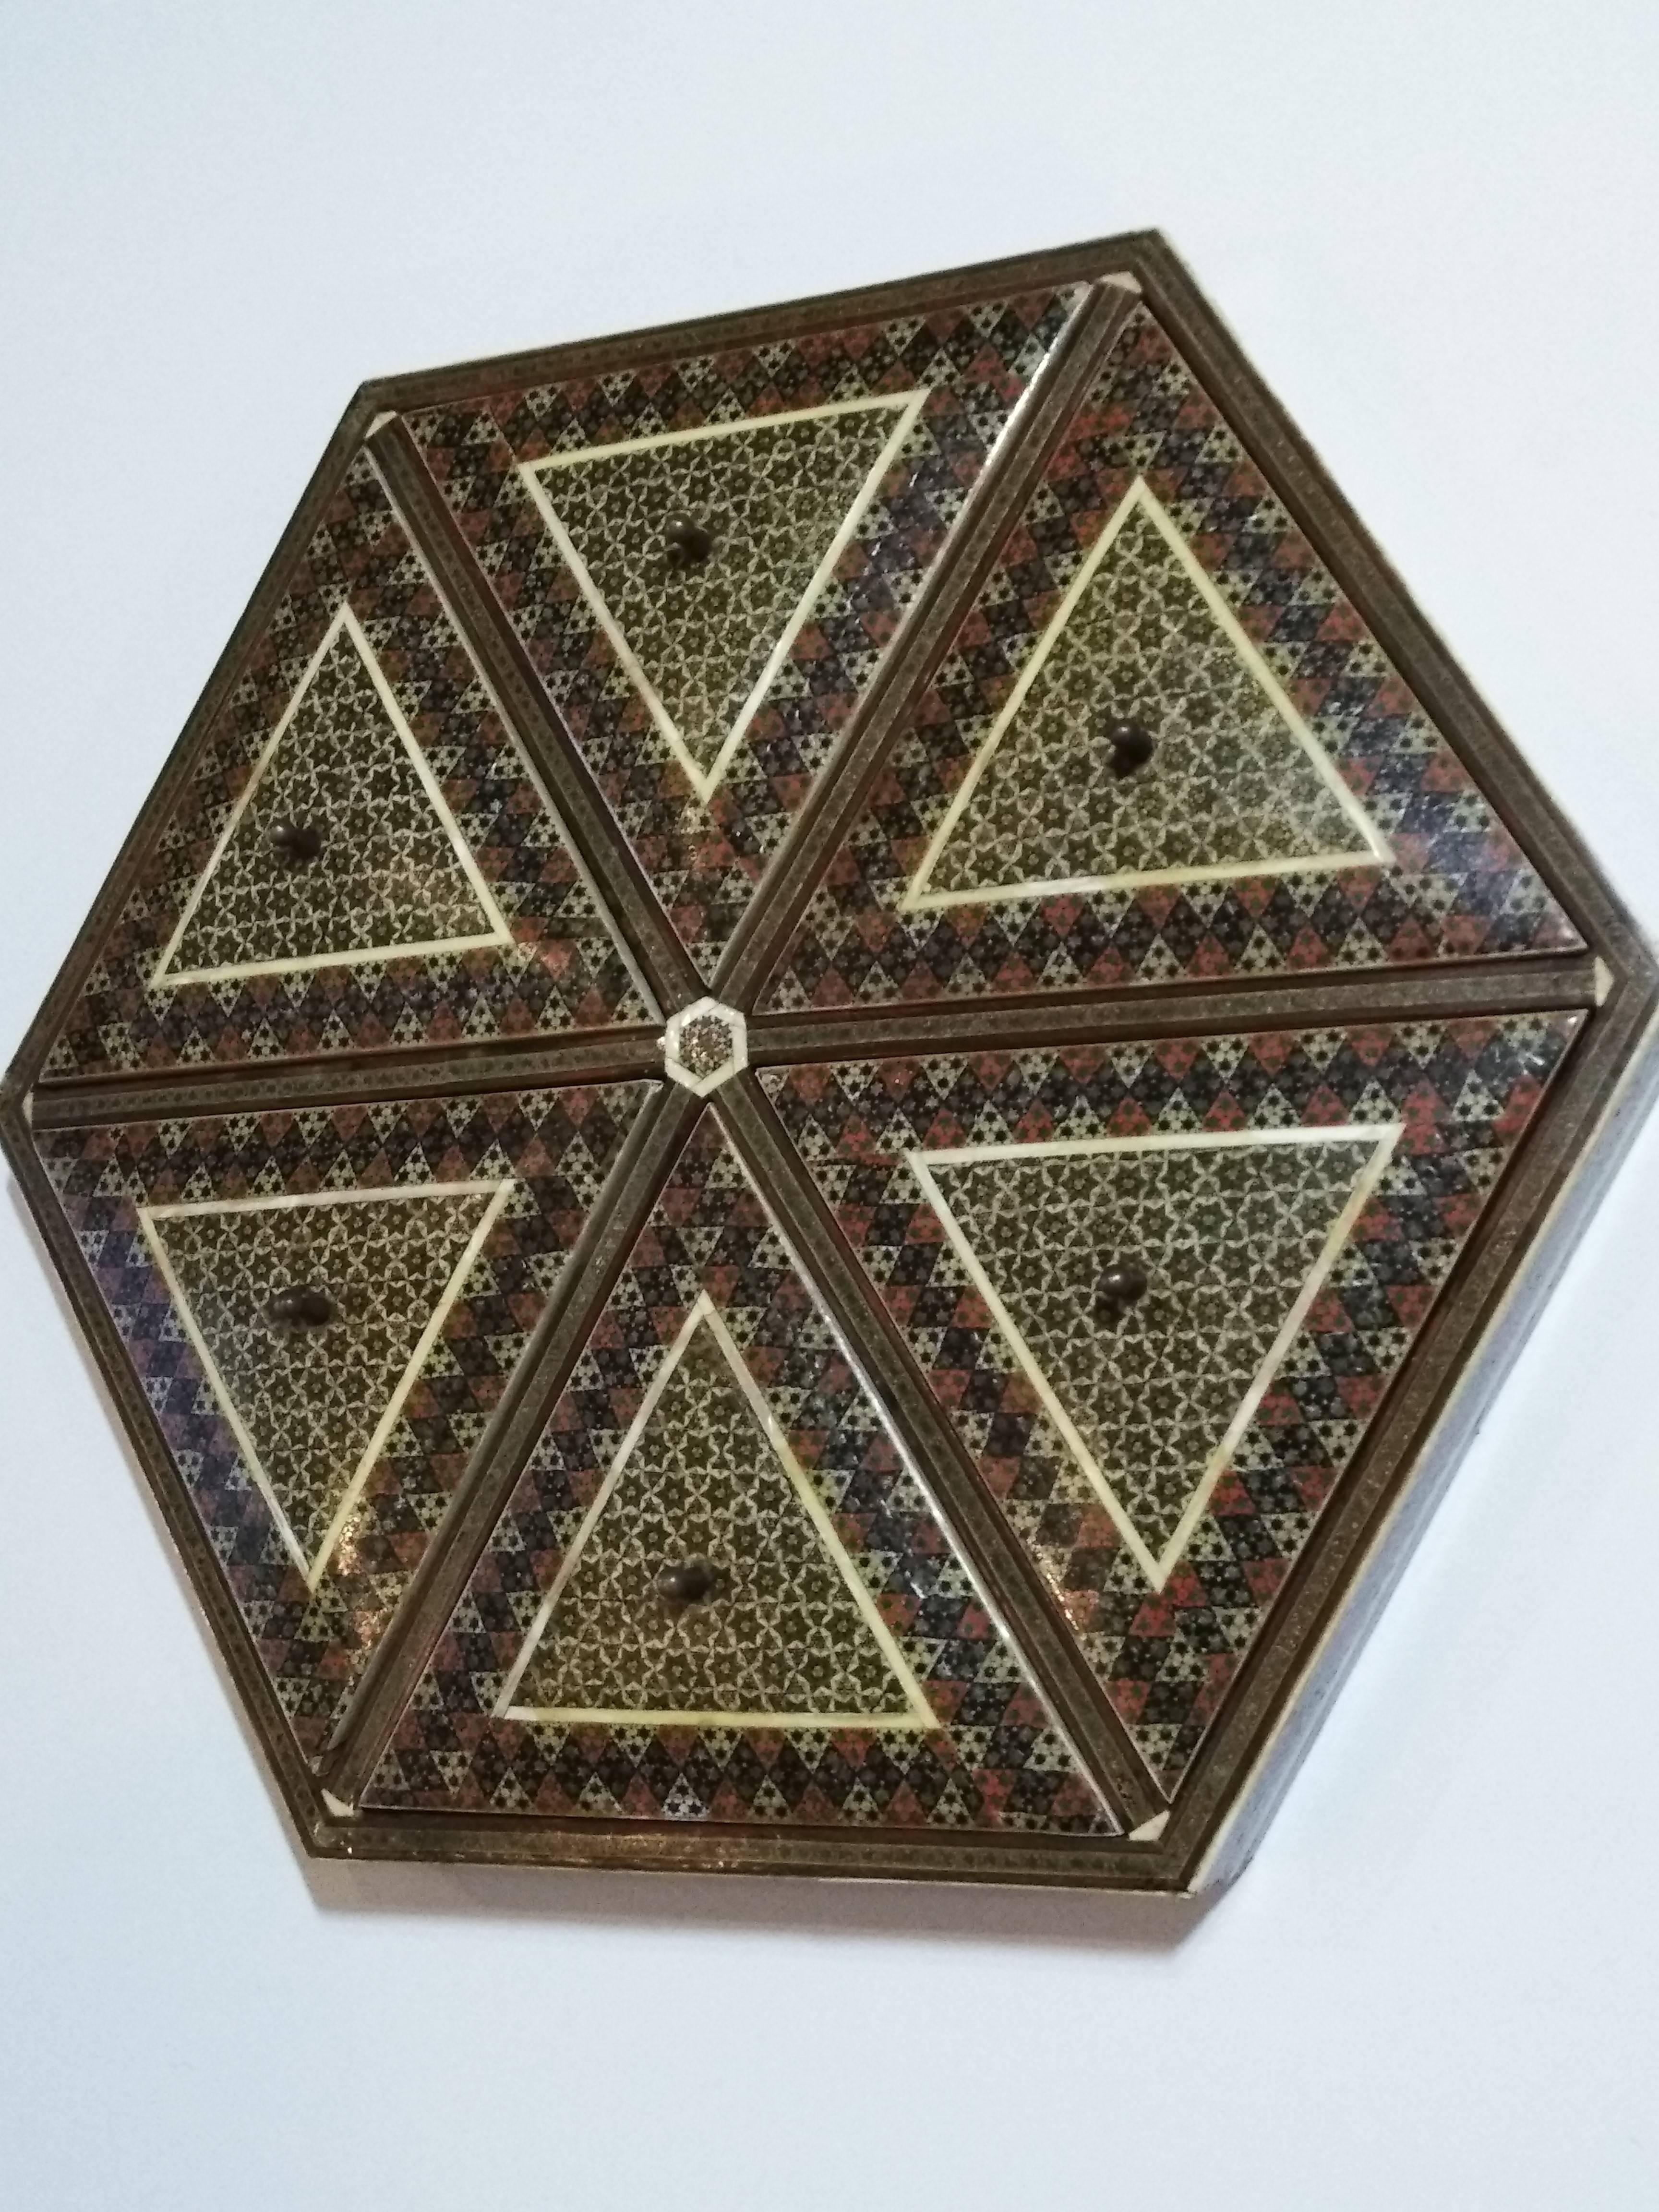 Exquisite jewelry box, intricate inlay with Moorish motif design which is made of inlay with bone, wood, silver and copper thread.

Interior is lined with antique red velvet with glass bottom. Each top has a brass nob.